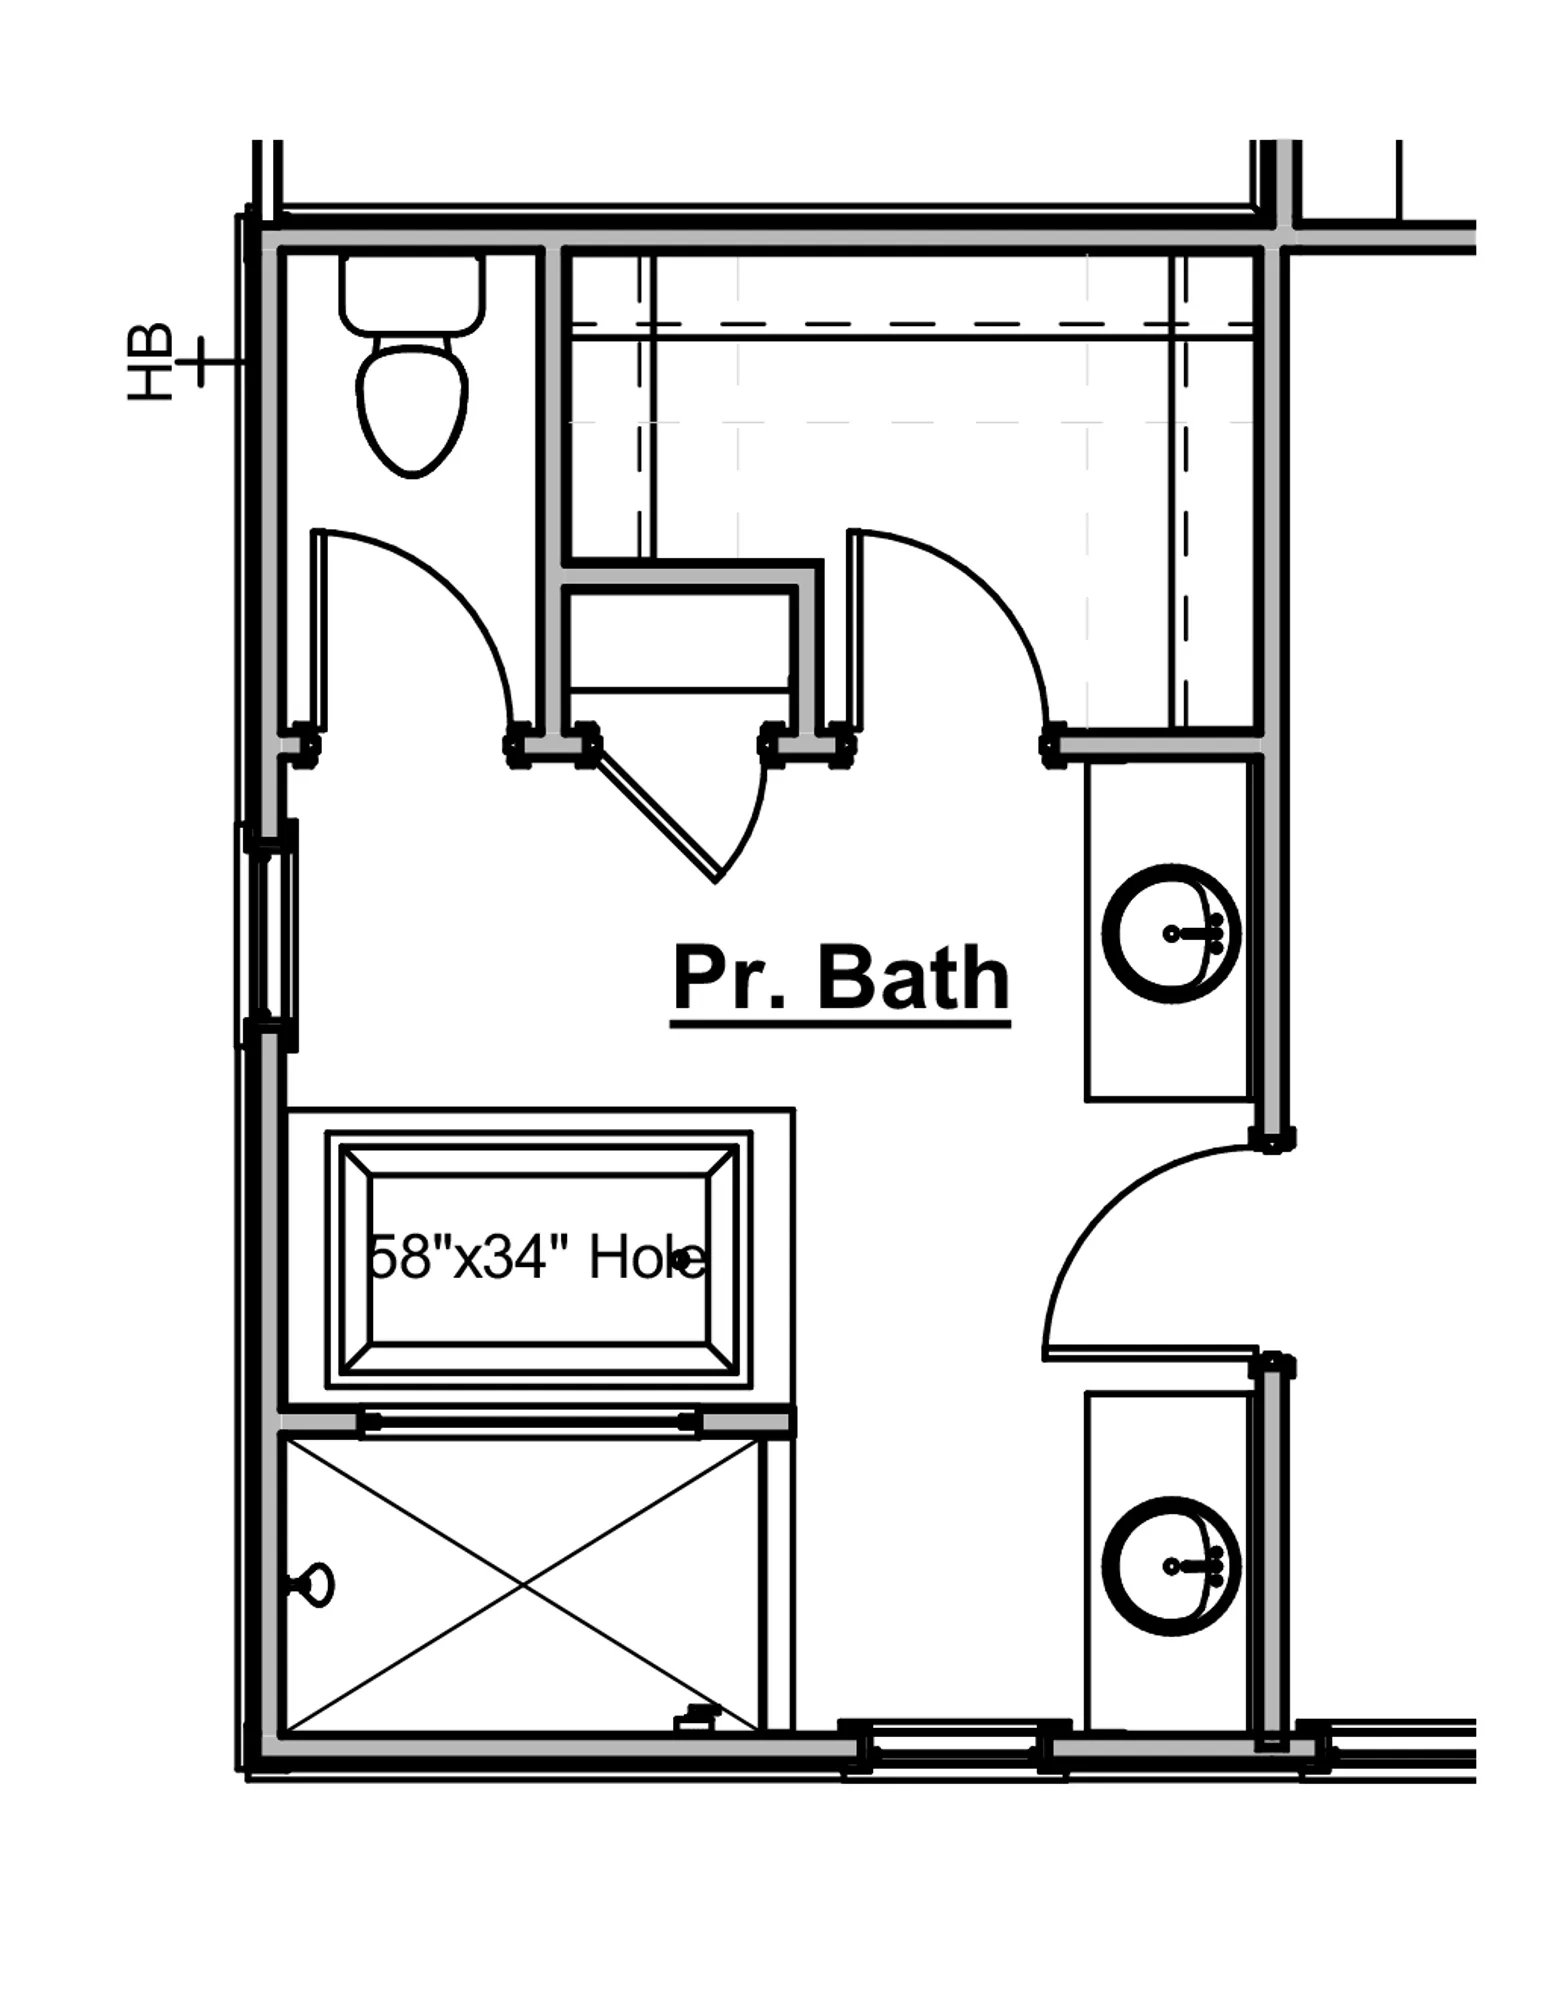 Primary Bath Layout: Separate Tub w/ Separate Shower - undefined